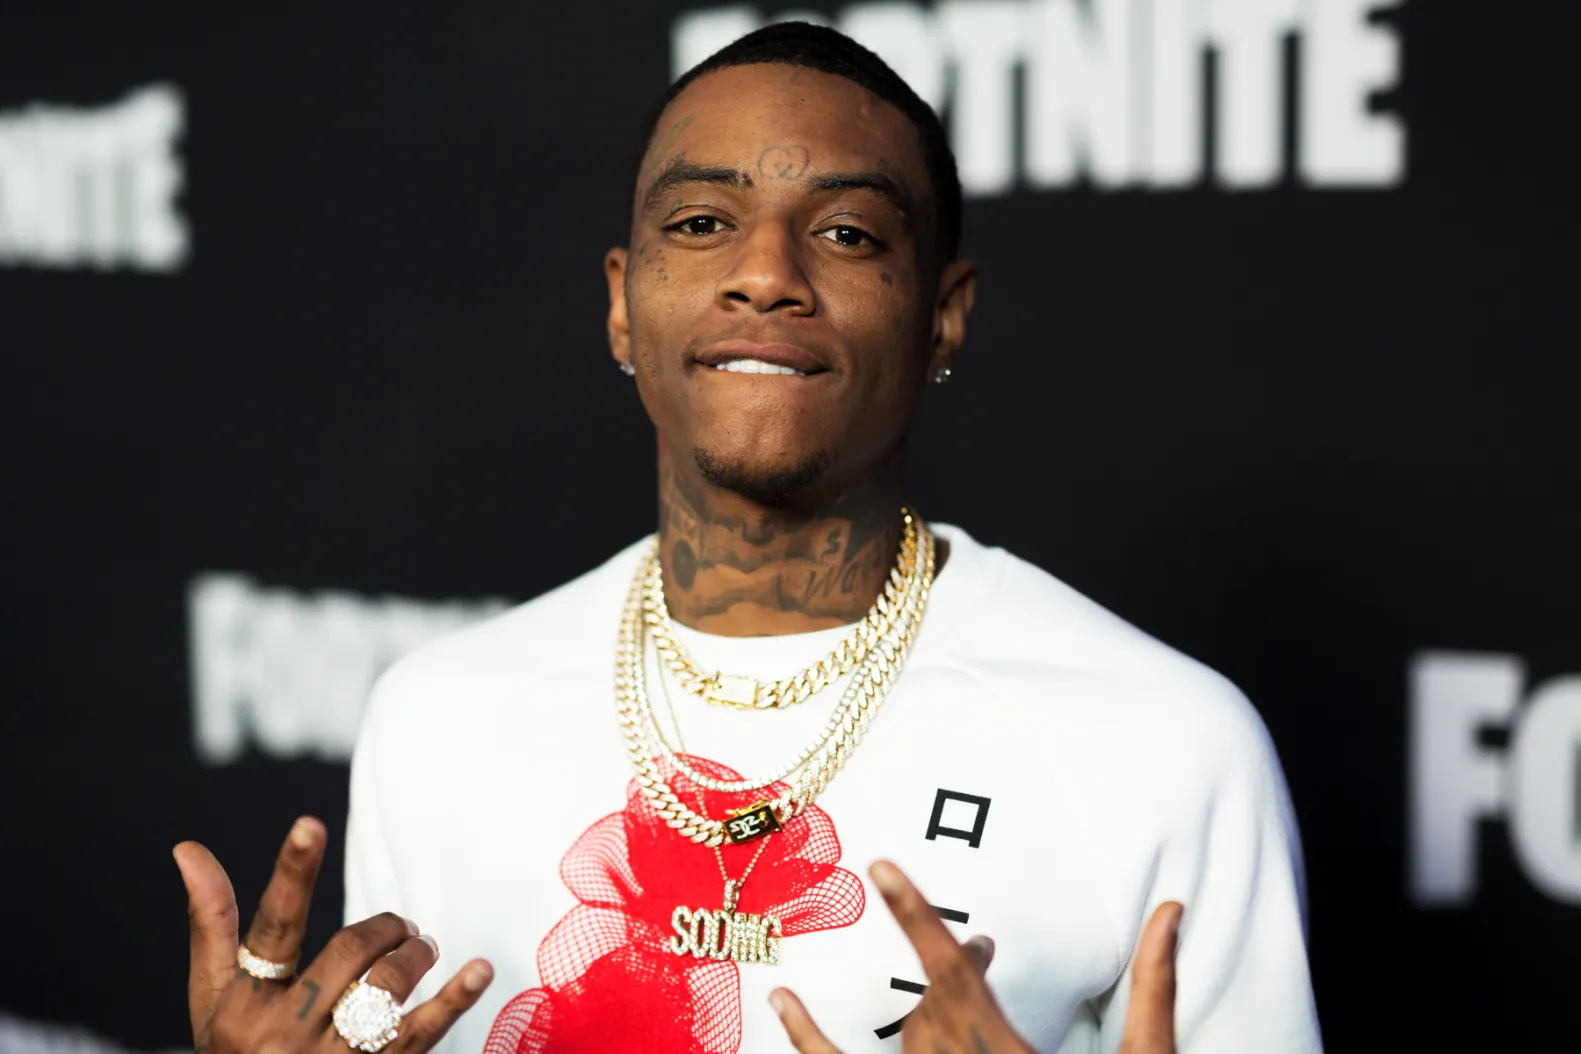 Soulja Boy Rushes to Court After Ex-GF Demands $10 Million Over Alleged Assault That Led to Miscarriage